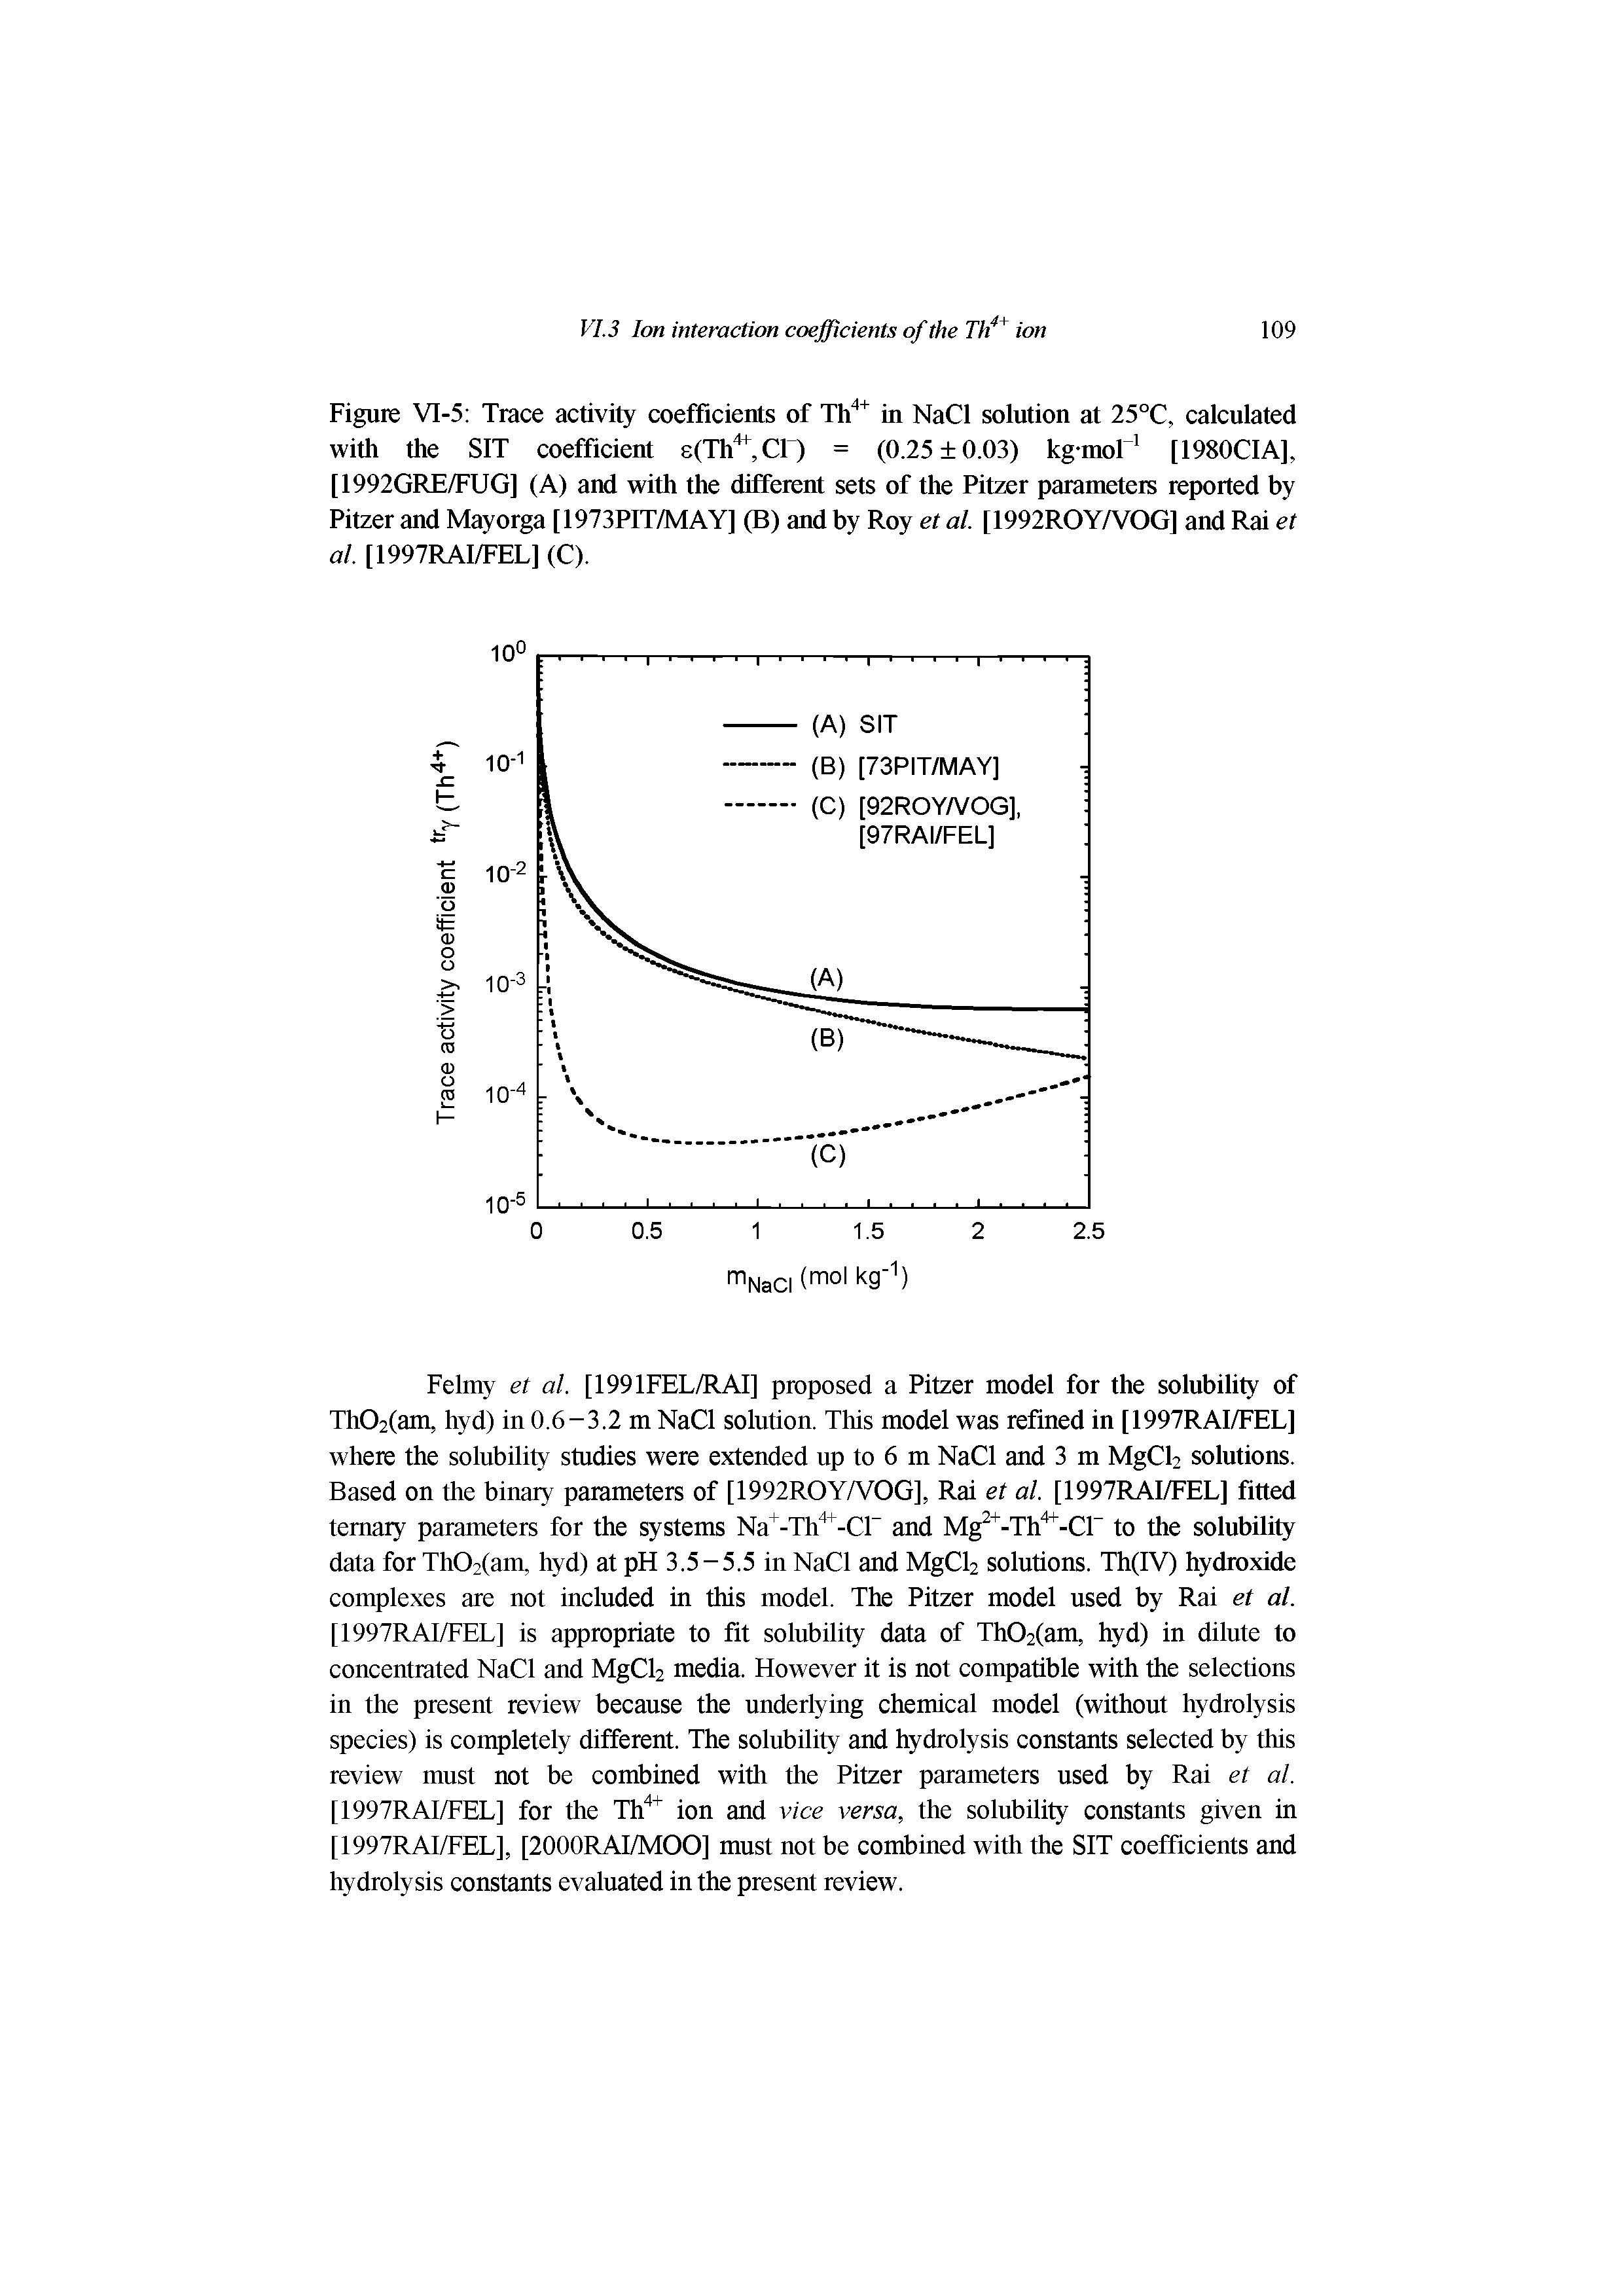 Figure VI-5 Trace activity coefficients of in NaCl solution at 25°C, calculated with the SIT coefficient 8(Th", Cr) = (0.25 + 0.03) kg-mol [1980CIA], [1992GRE/FUG] (A) and with the different sets of the Pitzer parameters reported by Pitzer and Mayorga [1973PIT/MAY] (B) and by Roy et al. [1992ROYA OG] and Rai et al. [1997RAI/FEL] (C).